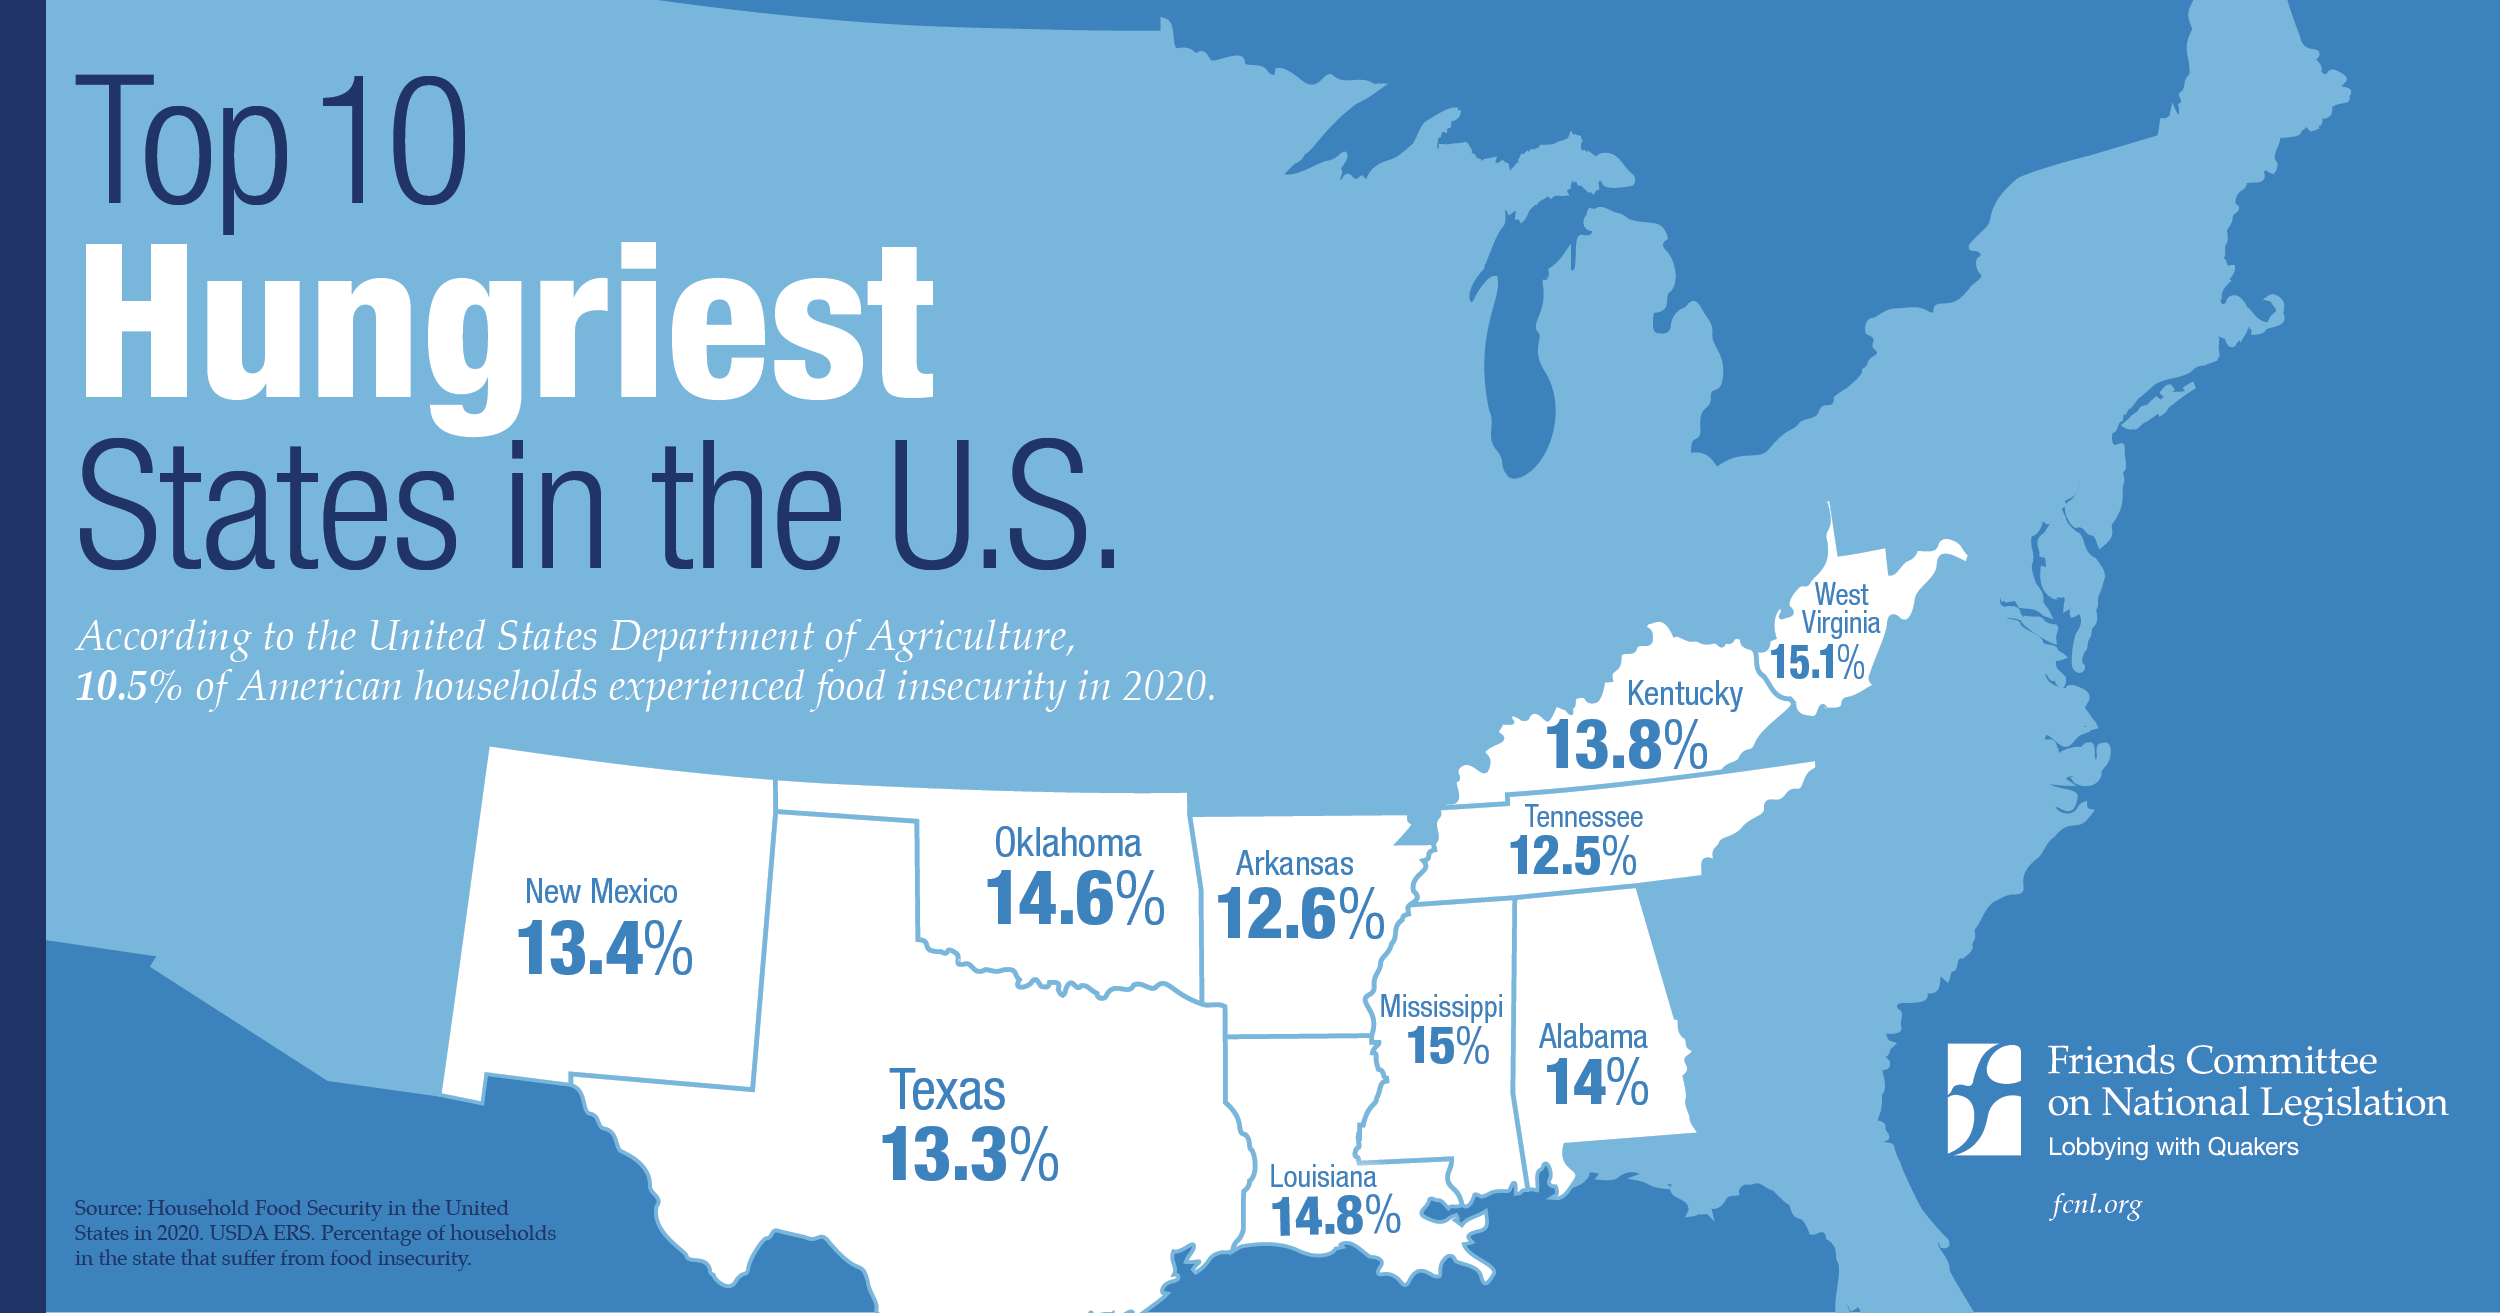 Graphic of the 10 hungriest states in the U.S.